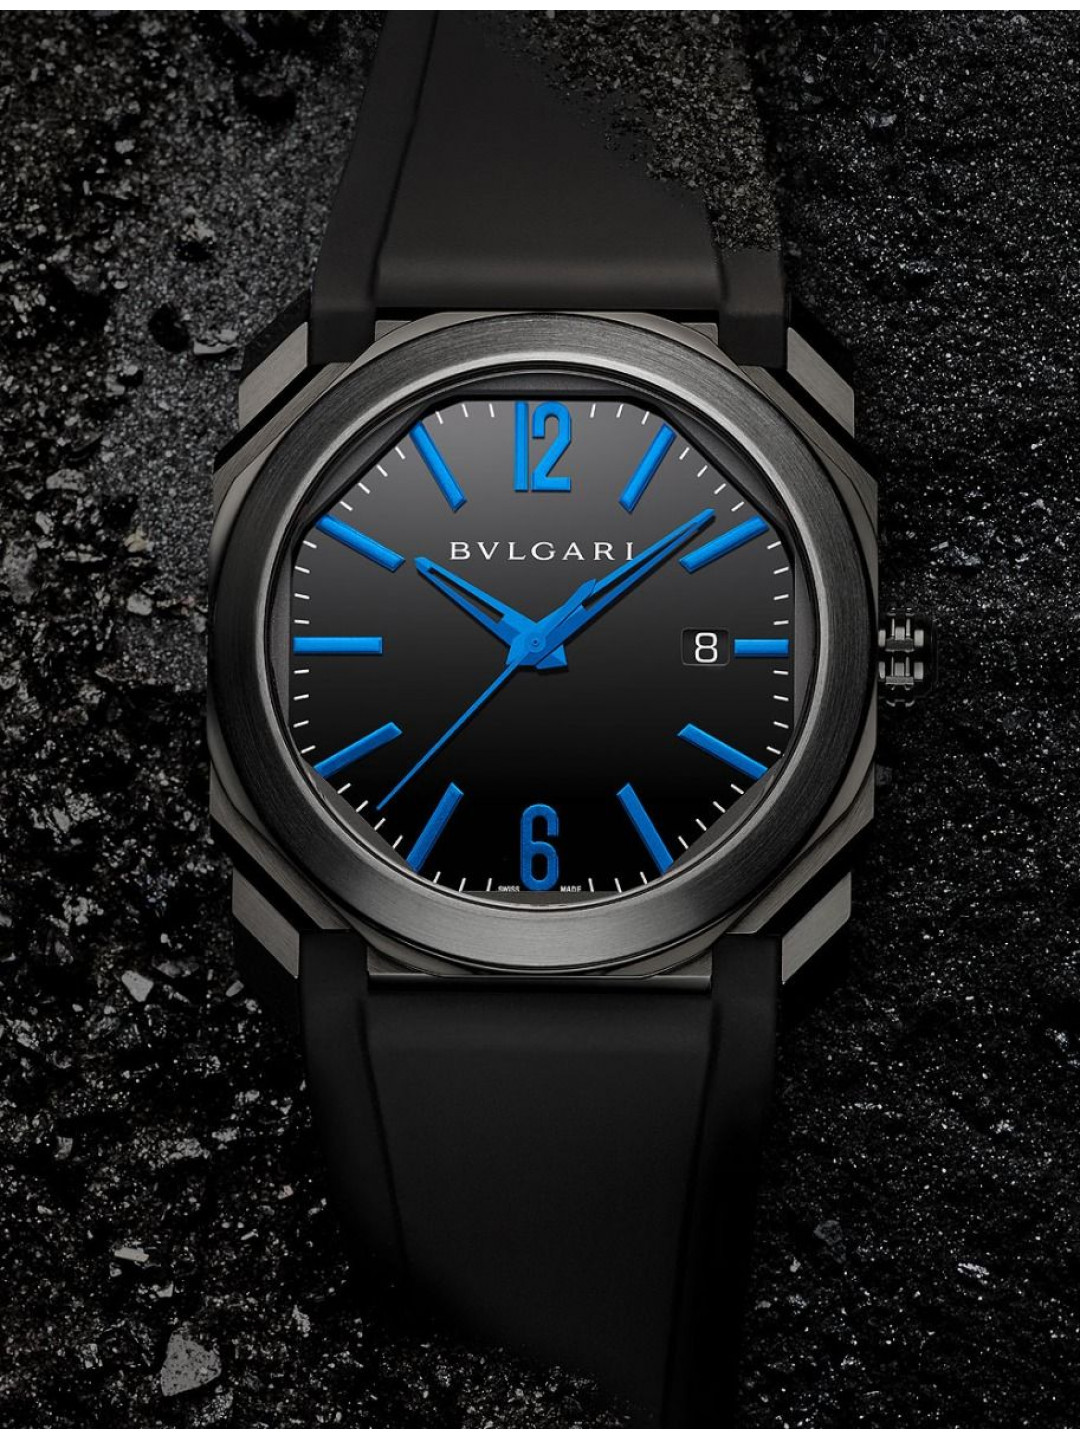 how much is bvlgari watch in nigeria